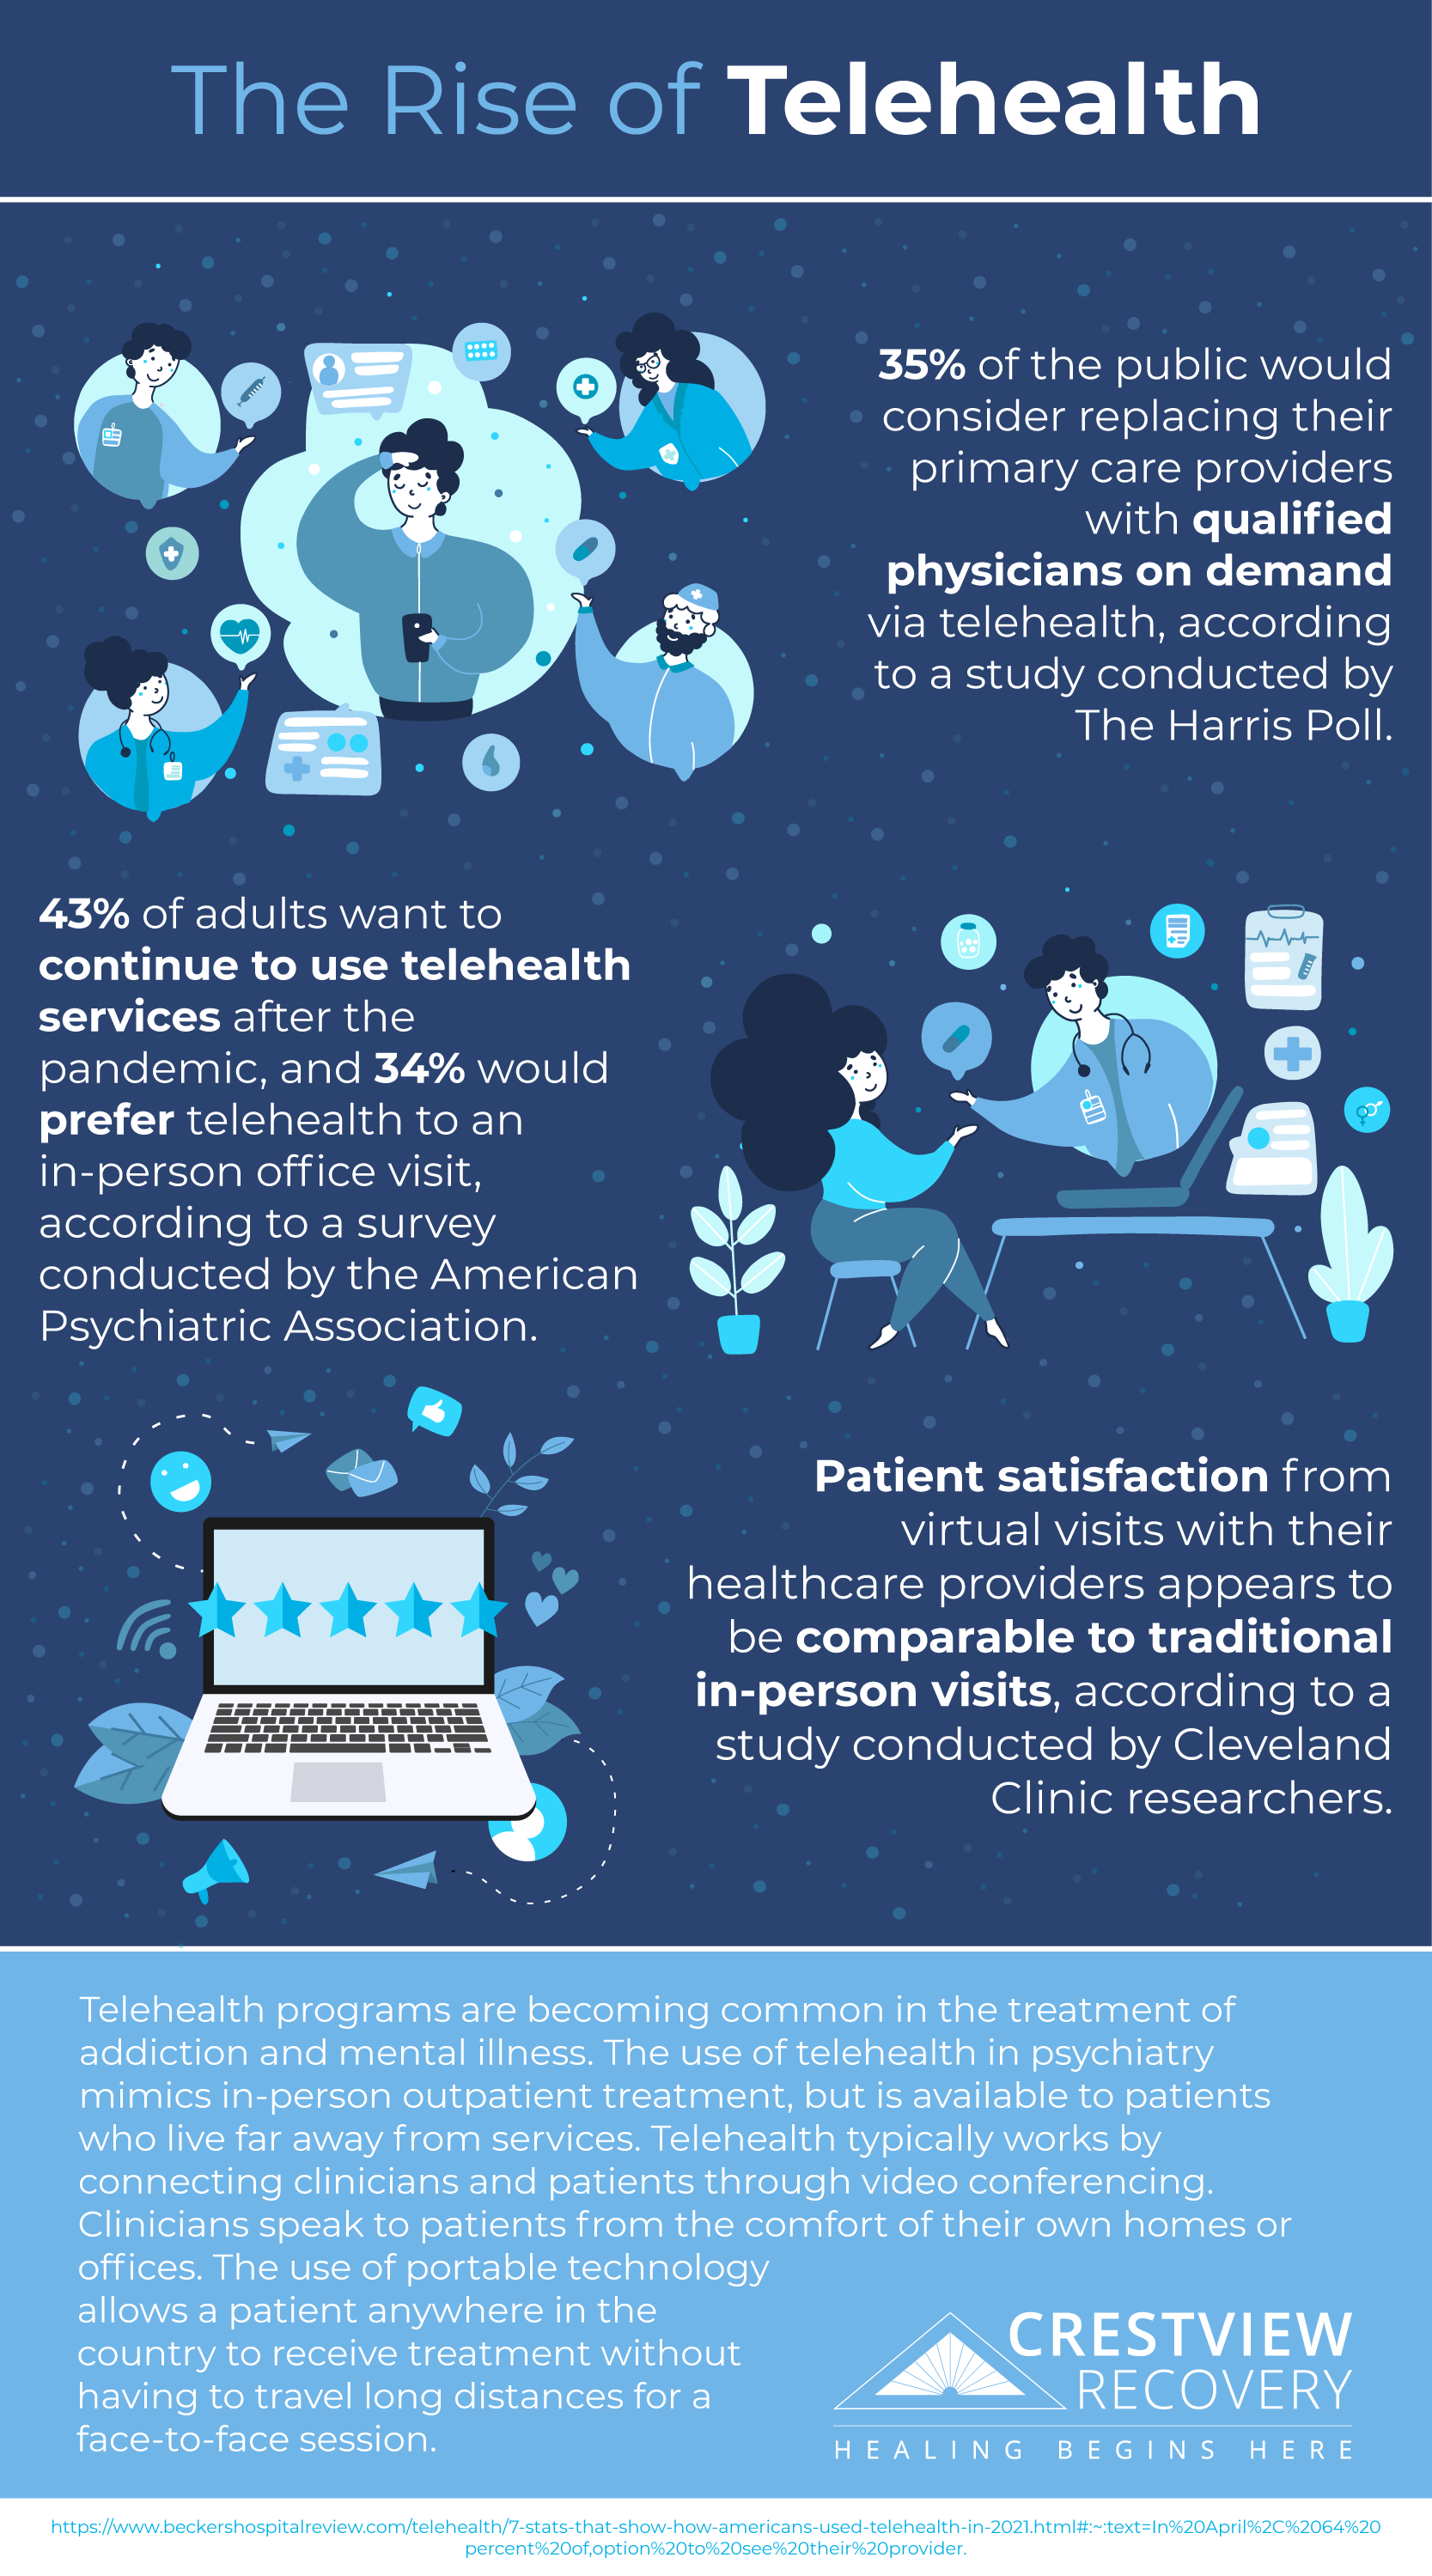 Crestview Recovery - The Rise of Telehealth